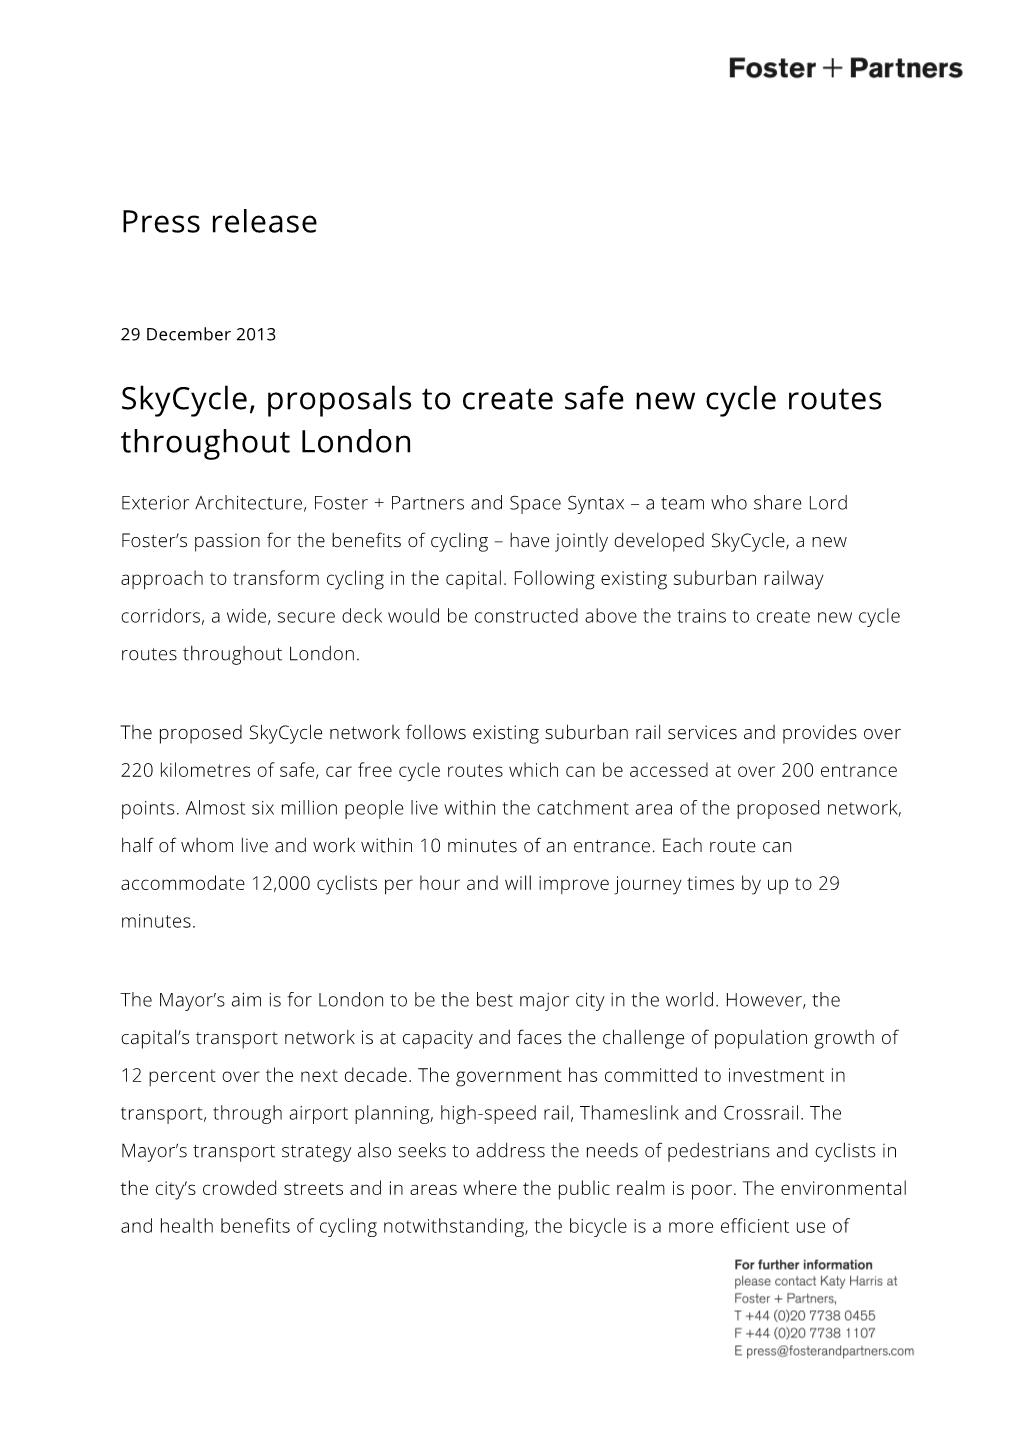 Press Release Skycycle, Proposals to Create Safe New Cycle Routes